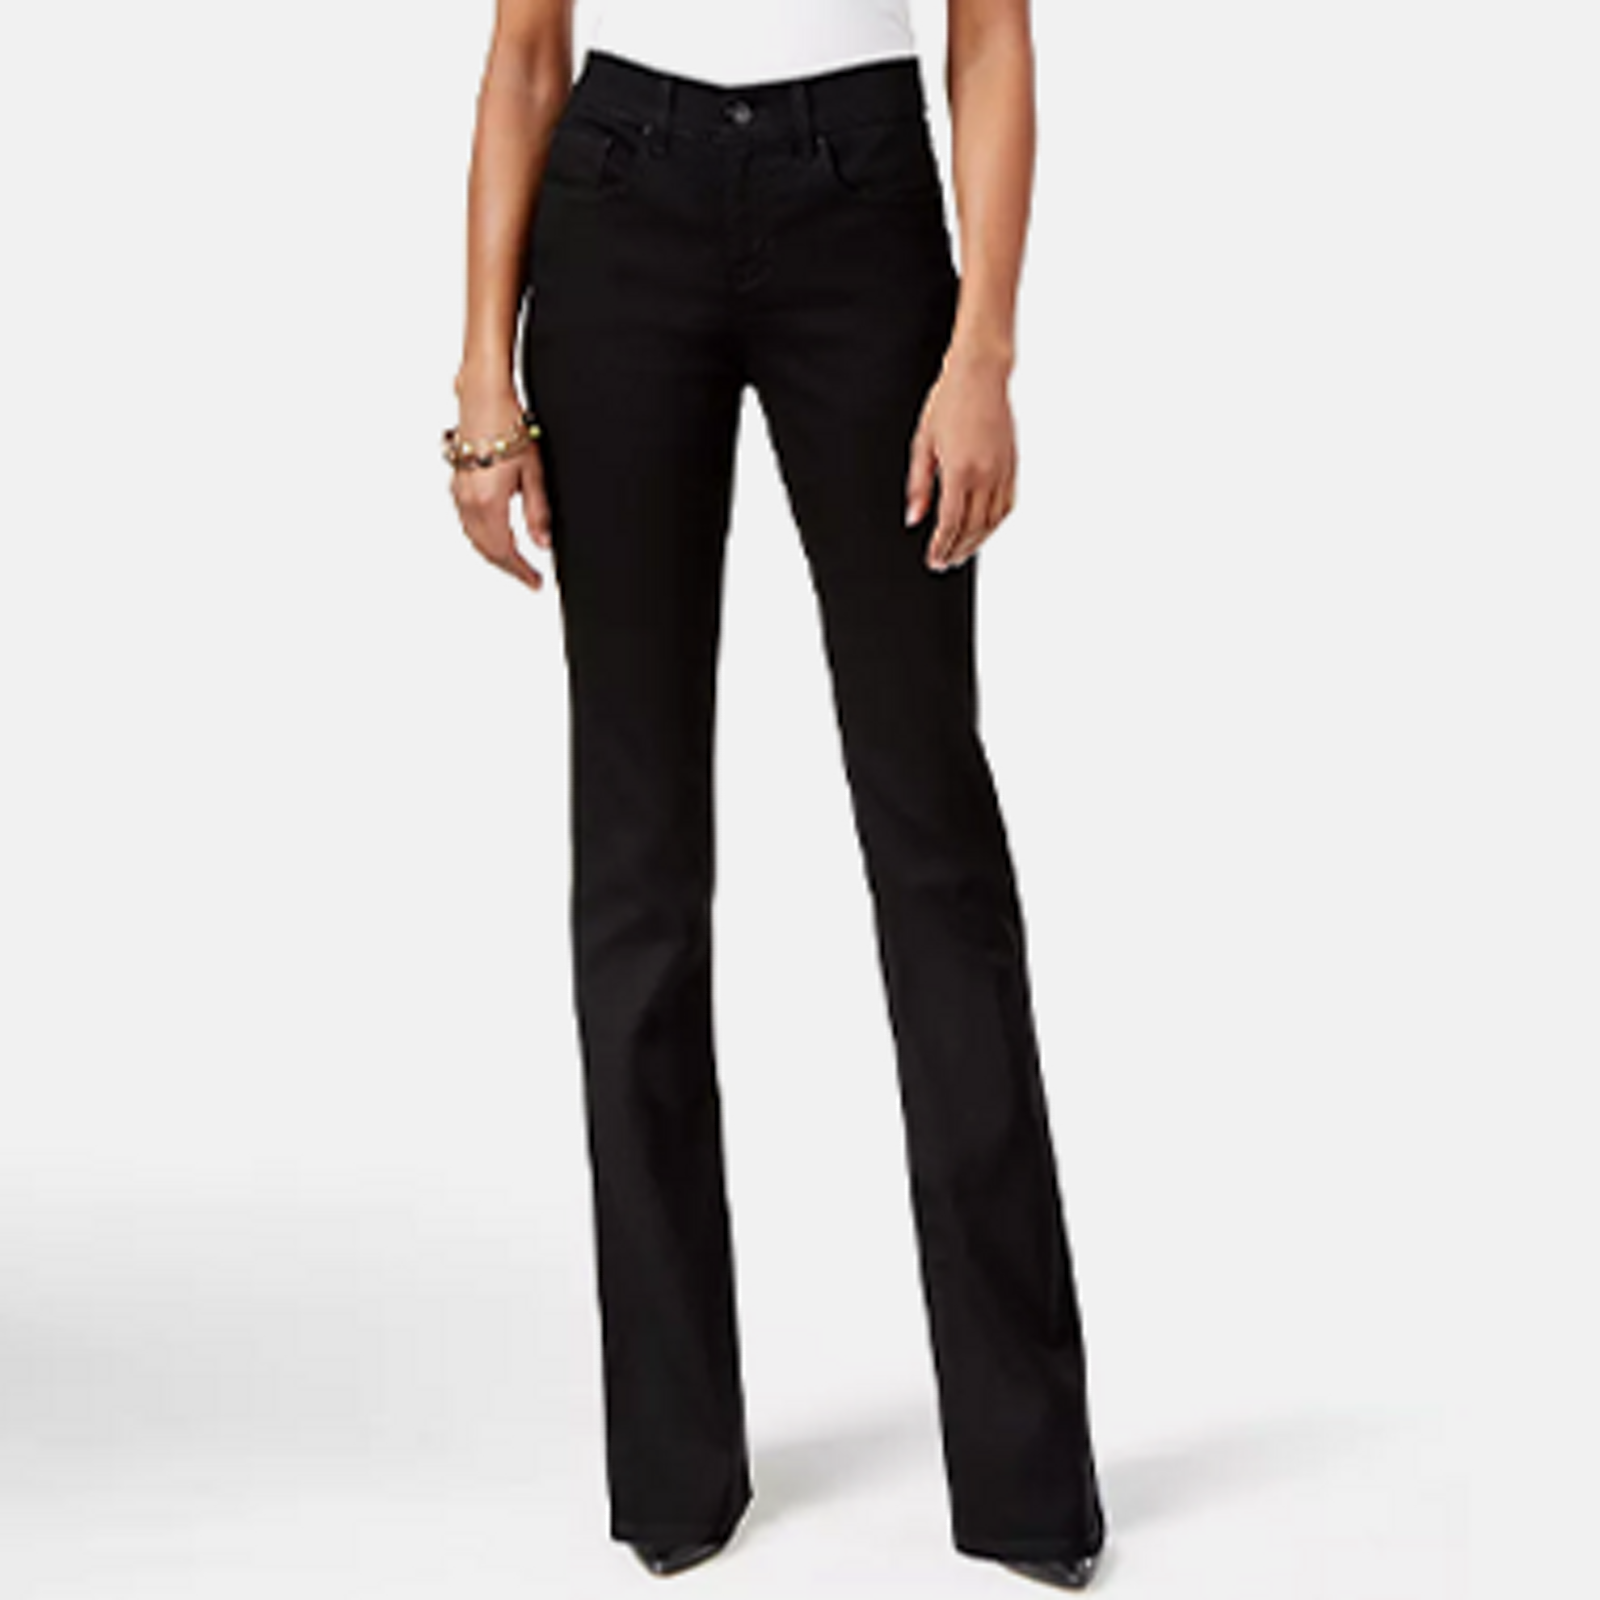 Jeggings Colored Jeans For Women - Macy's